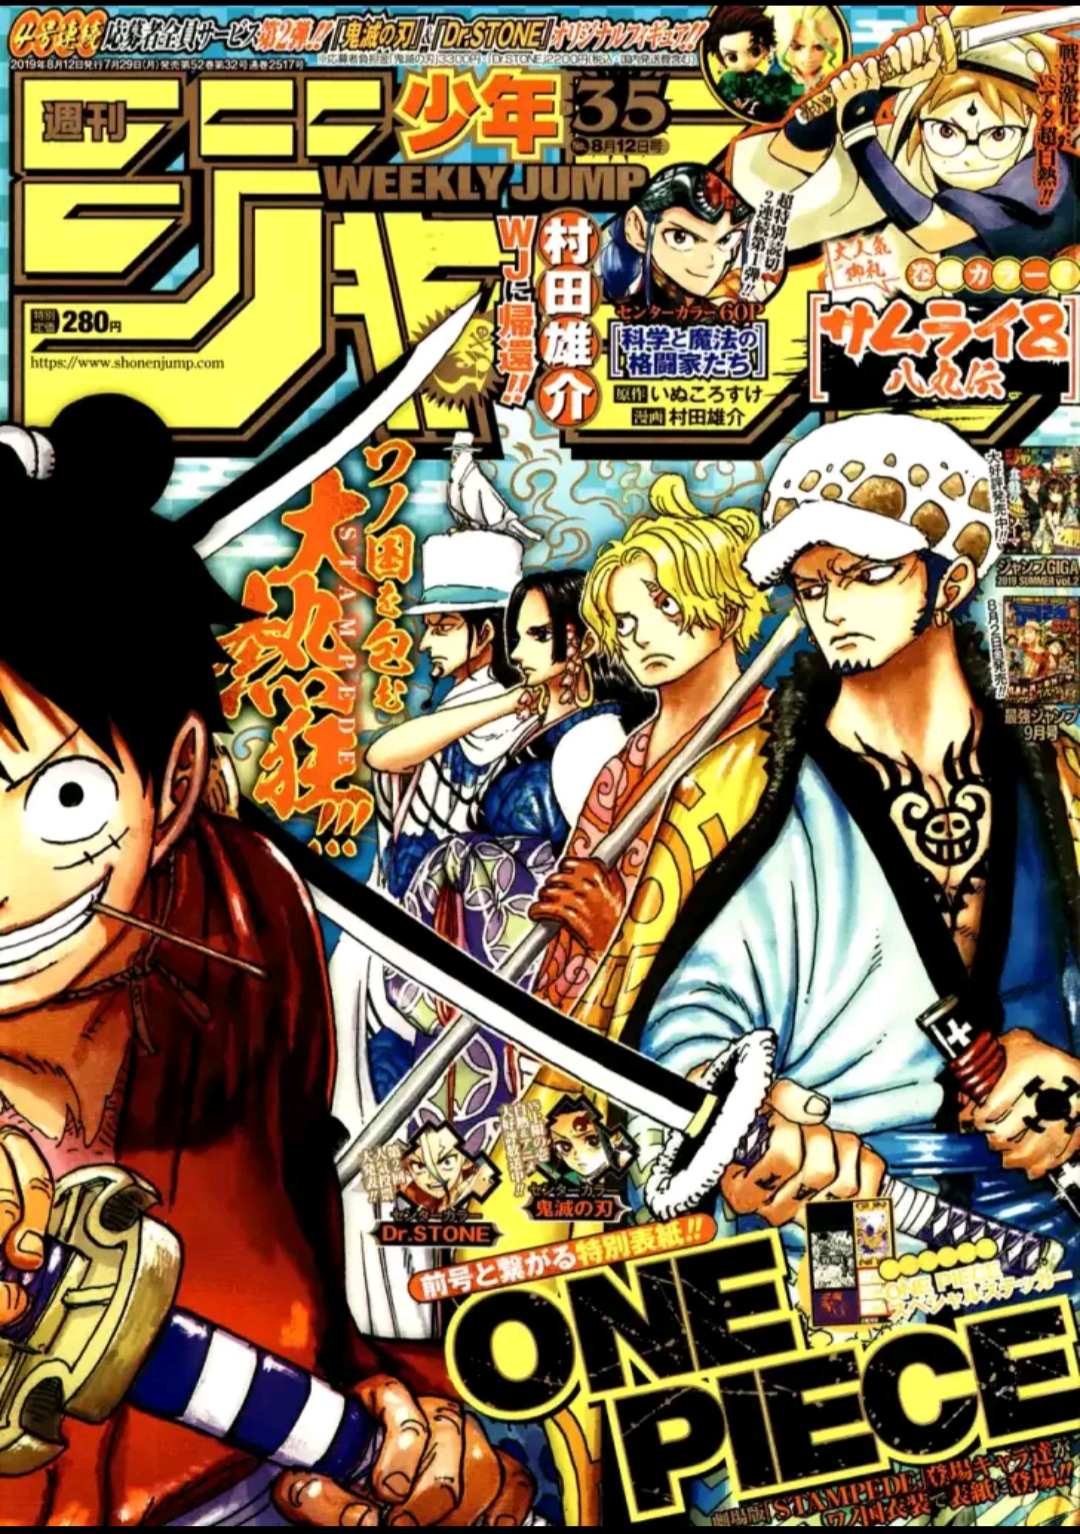 Animagician Anime And Manga Reviews Aftermaths Of Udon One Piece Chapter 950 Review